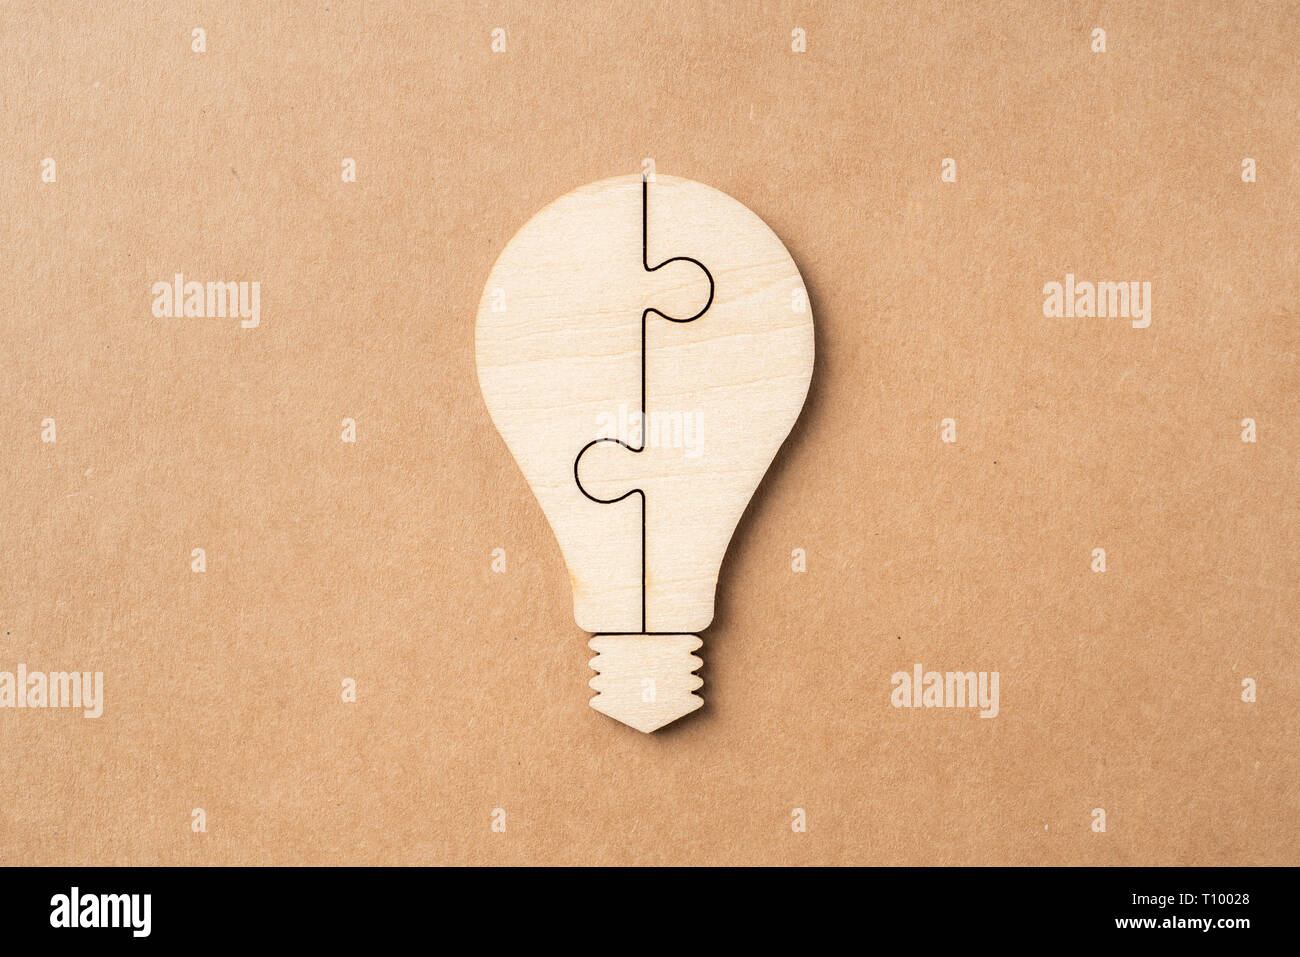 Download Business And Design Concept Light Bulb Jigsaw Icon On Kraft Paper For Infographic Mockup Stock Photo Alamy PSD Mockup Templates